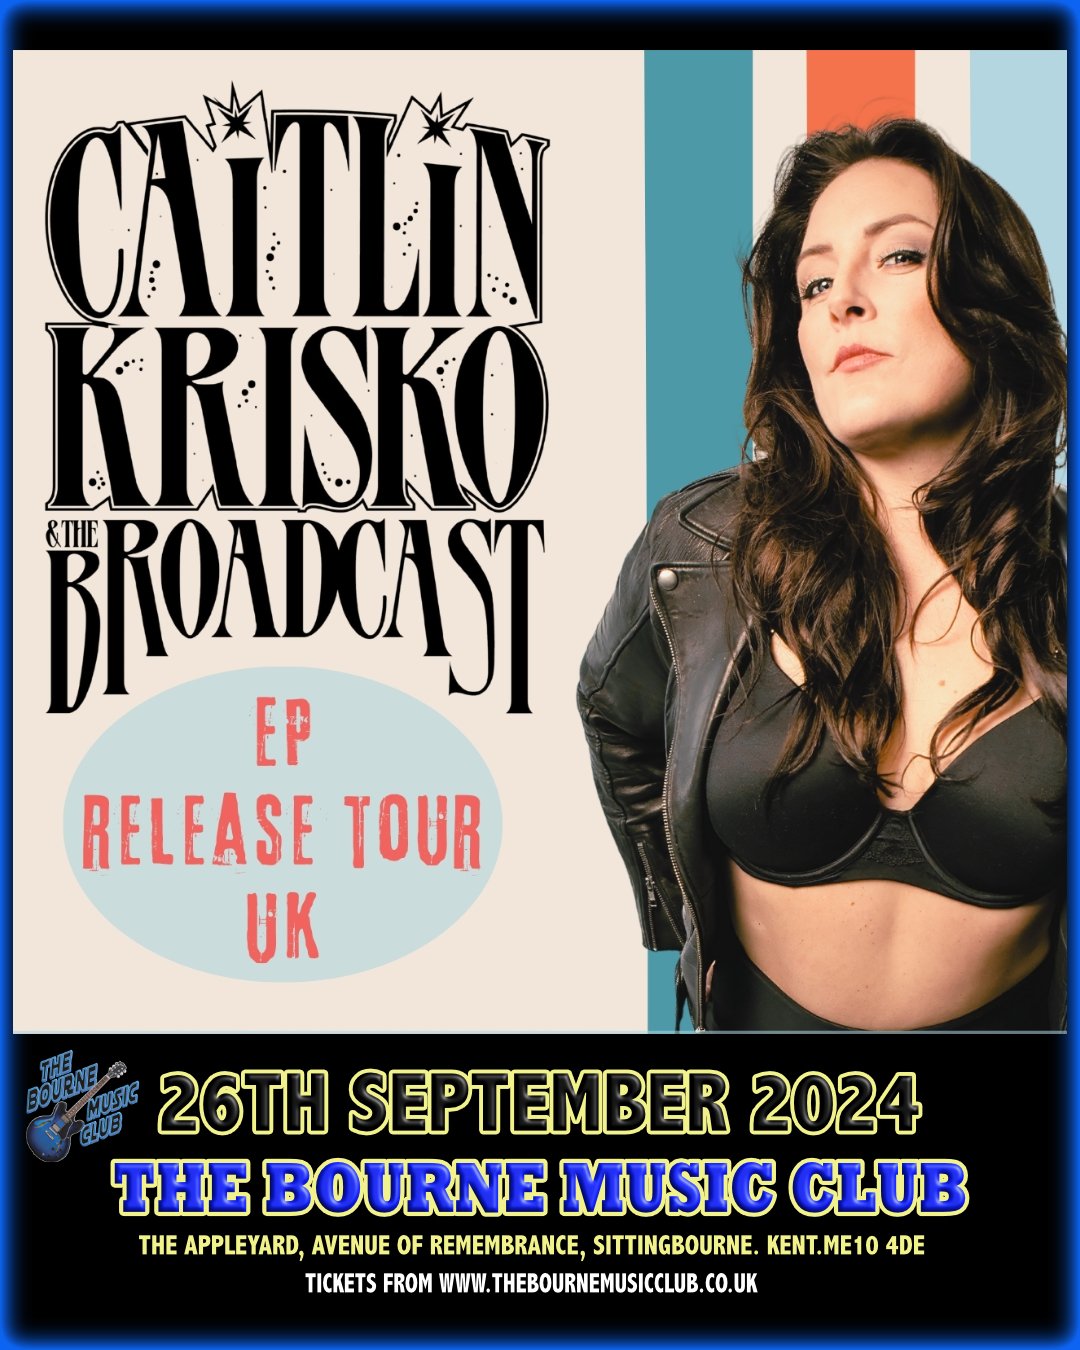 CAITLIN KRISKO AND THE BROADCAST TO PERFORM IN SITTINGBOURNE AS PART OF THEIR FIRST UK HEADLINE TOUR